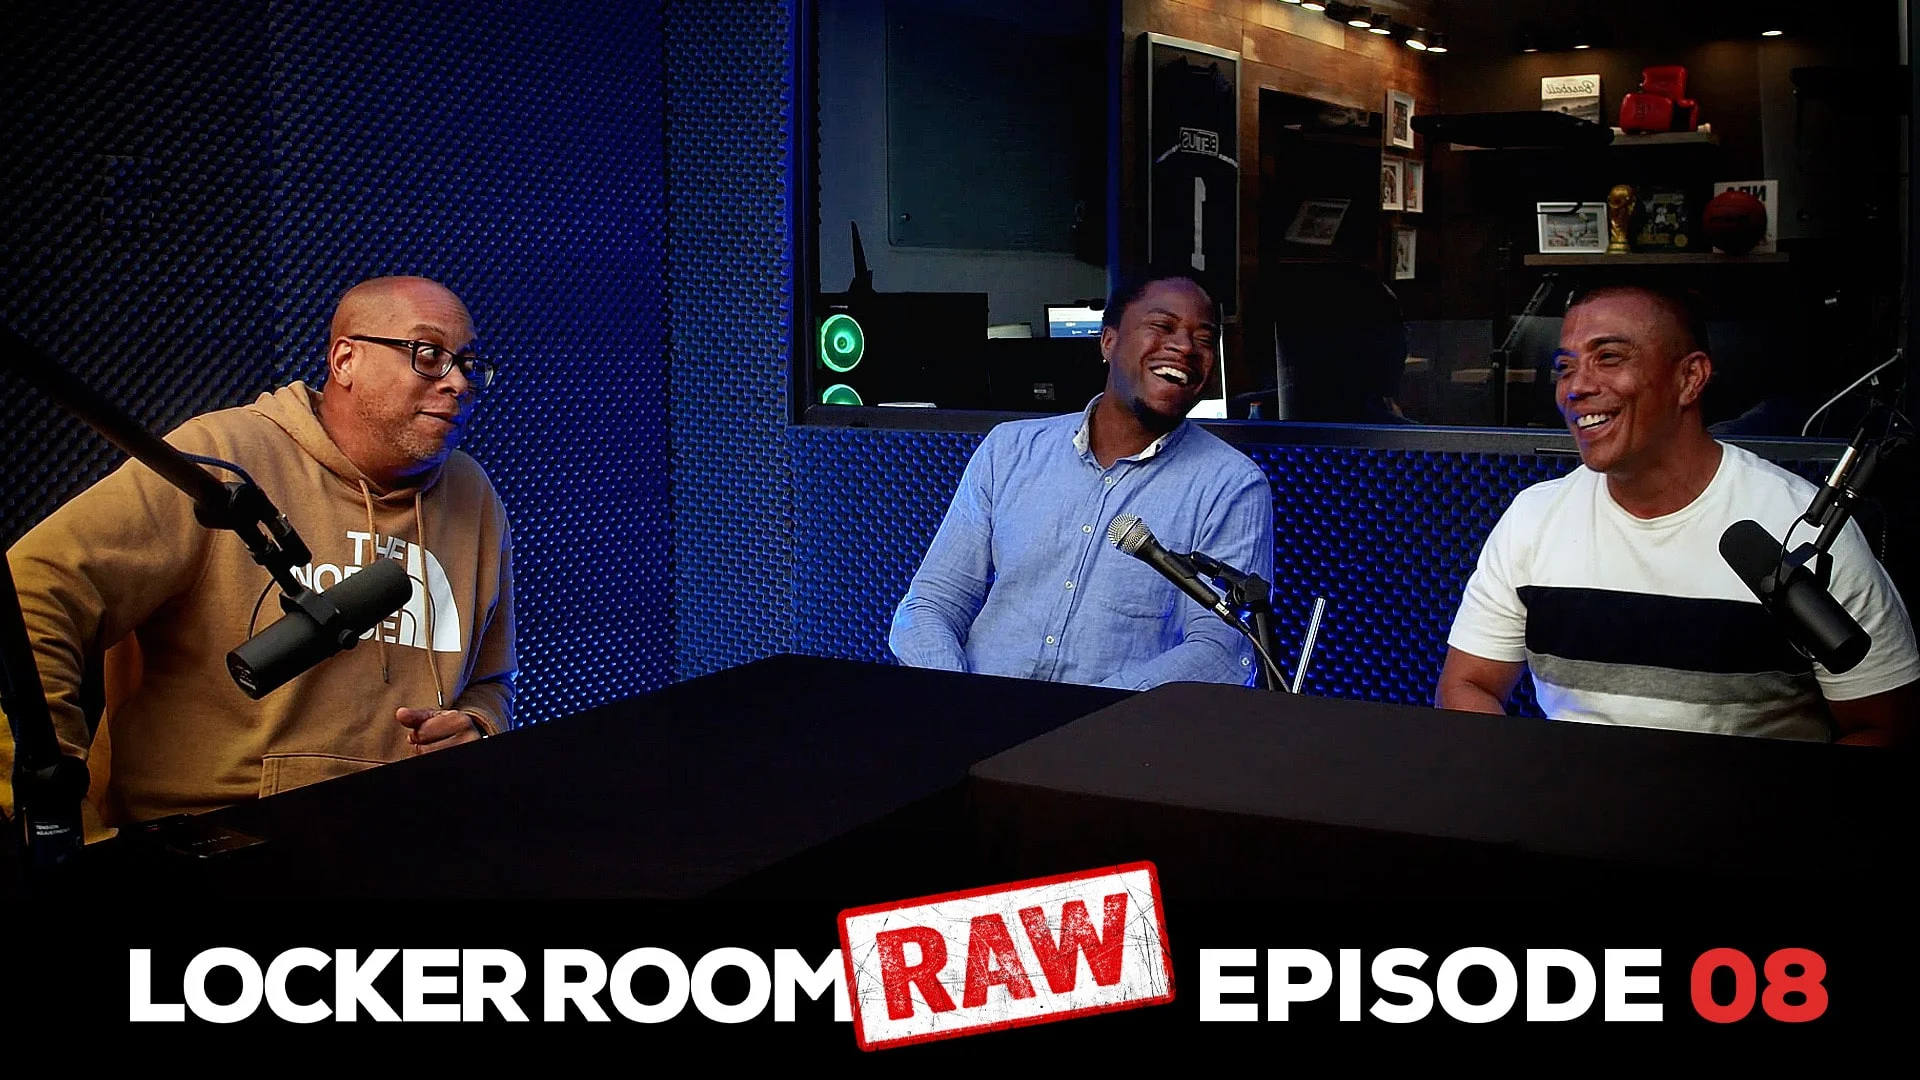 Locker Room RAW Podcast: What Is Going On With Refs?